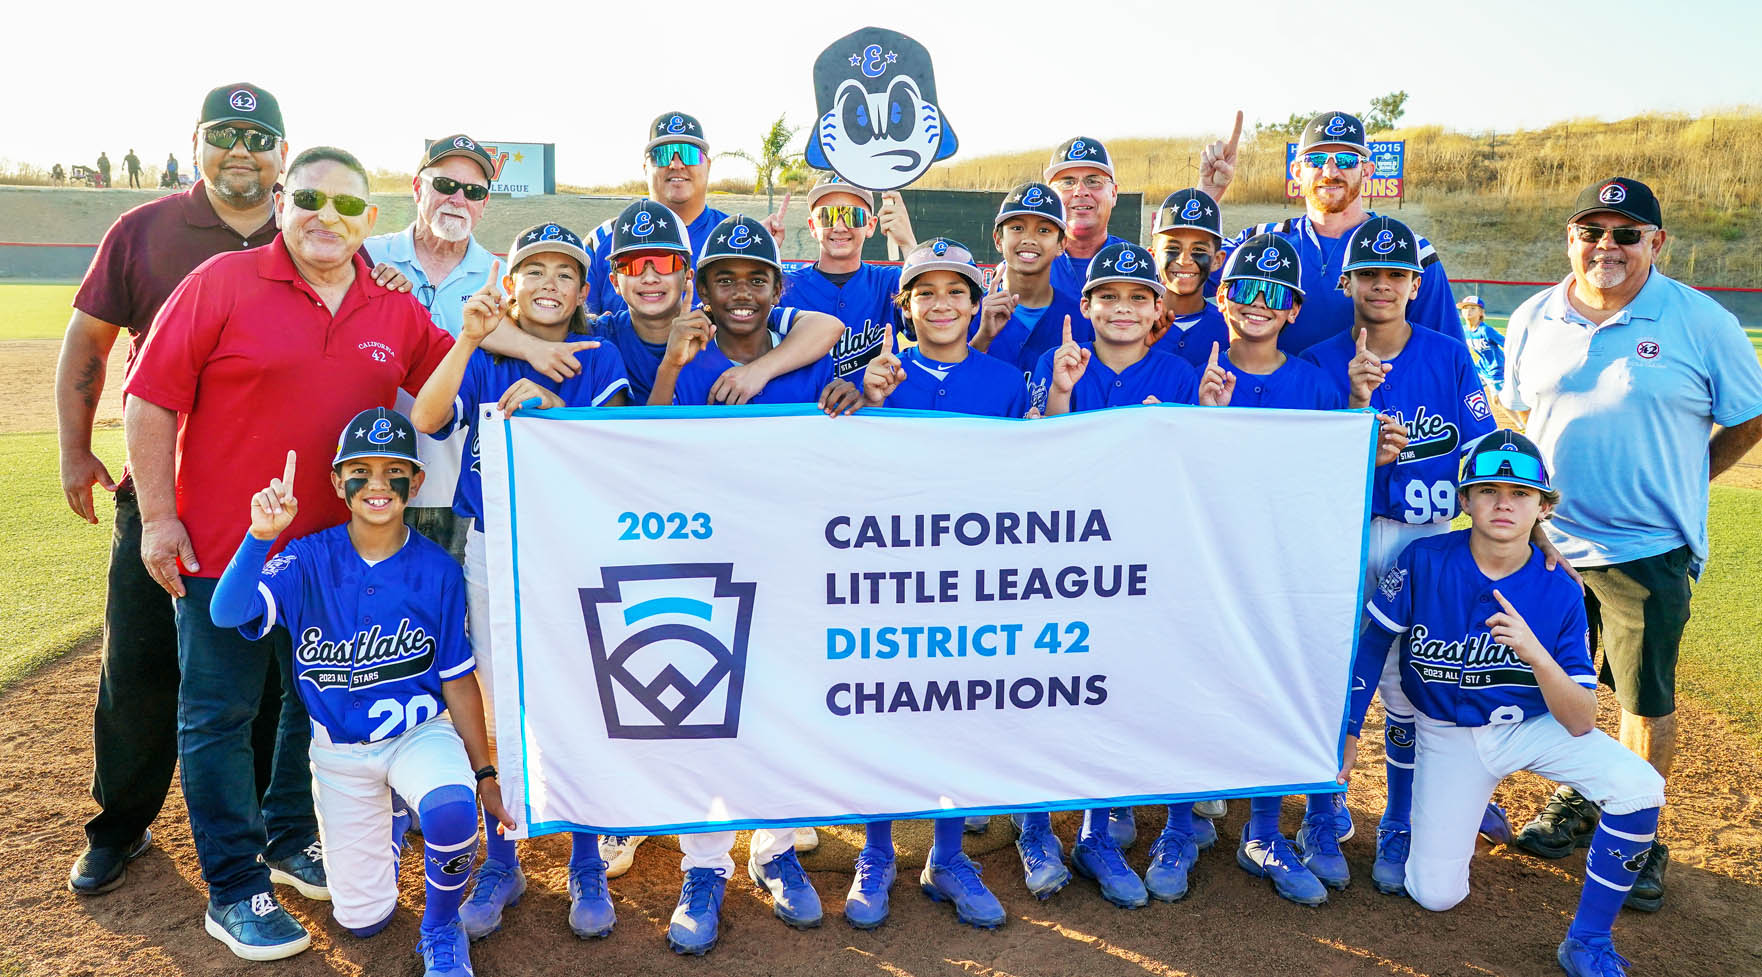 Road to the Little League World Series starts for Eastlake 12s